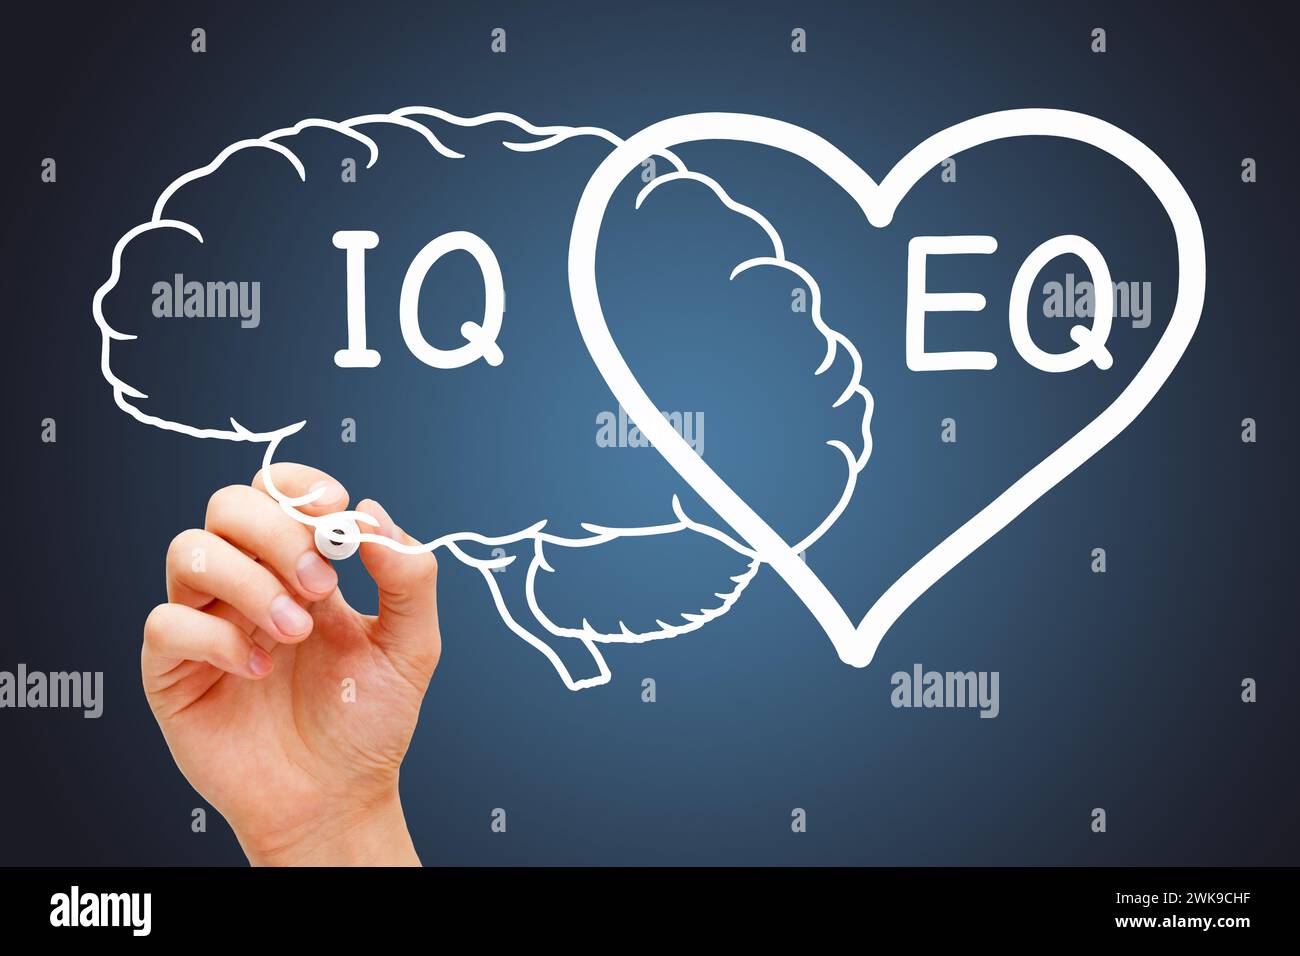 Hand drawing a heart and brain concept about the EQ emotional intelligence and IQ intelligence quotient. Stock Photo